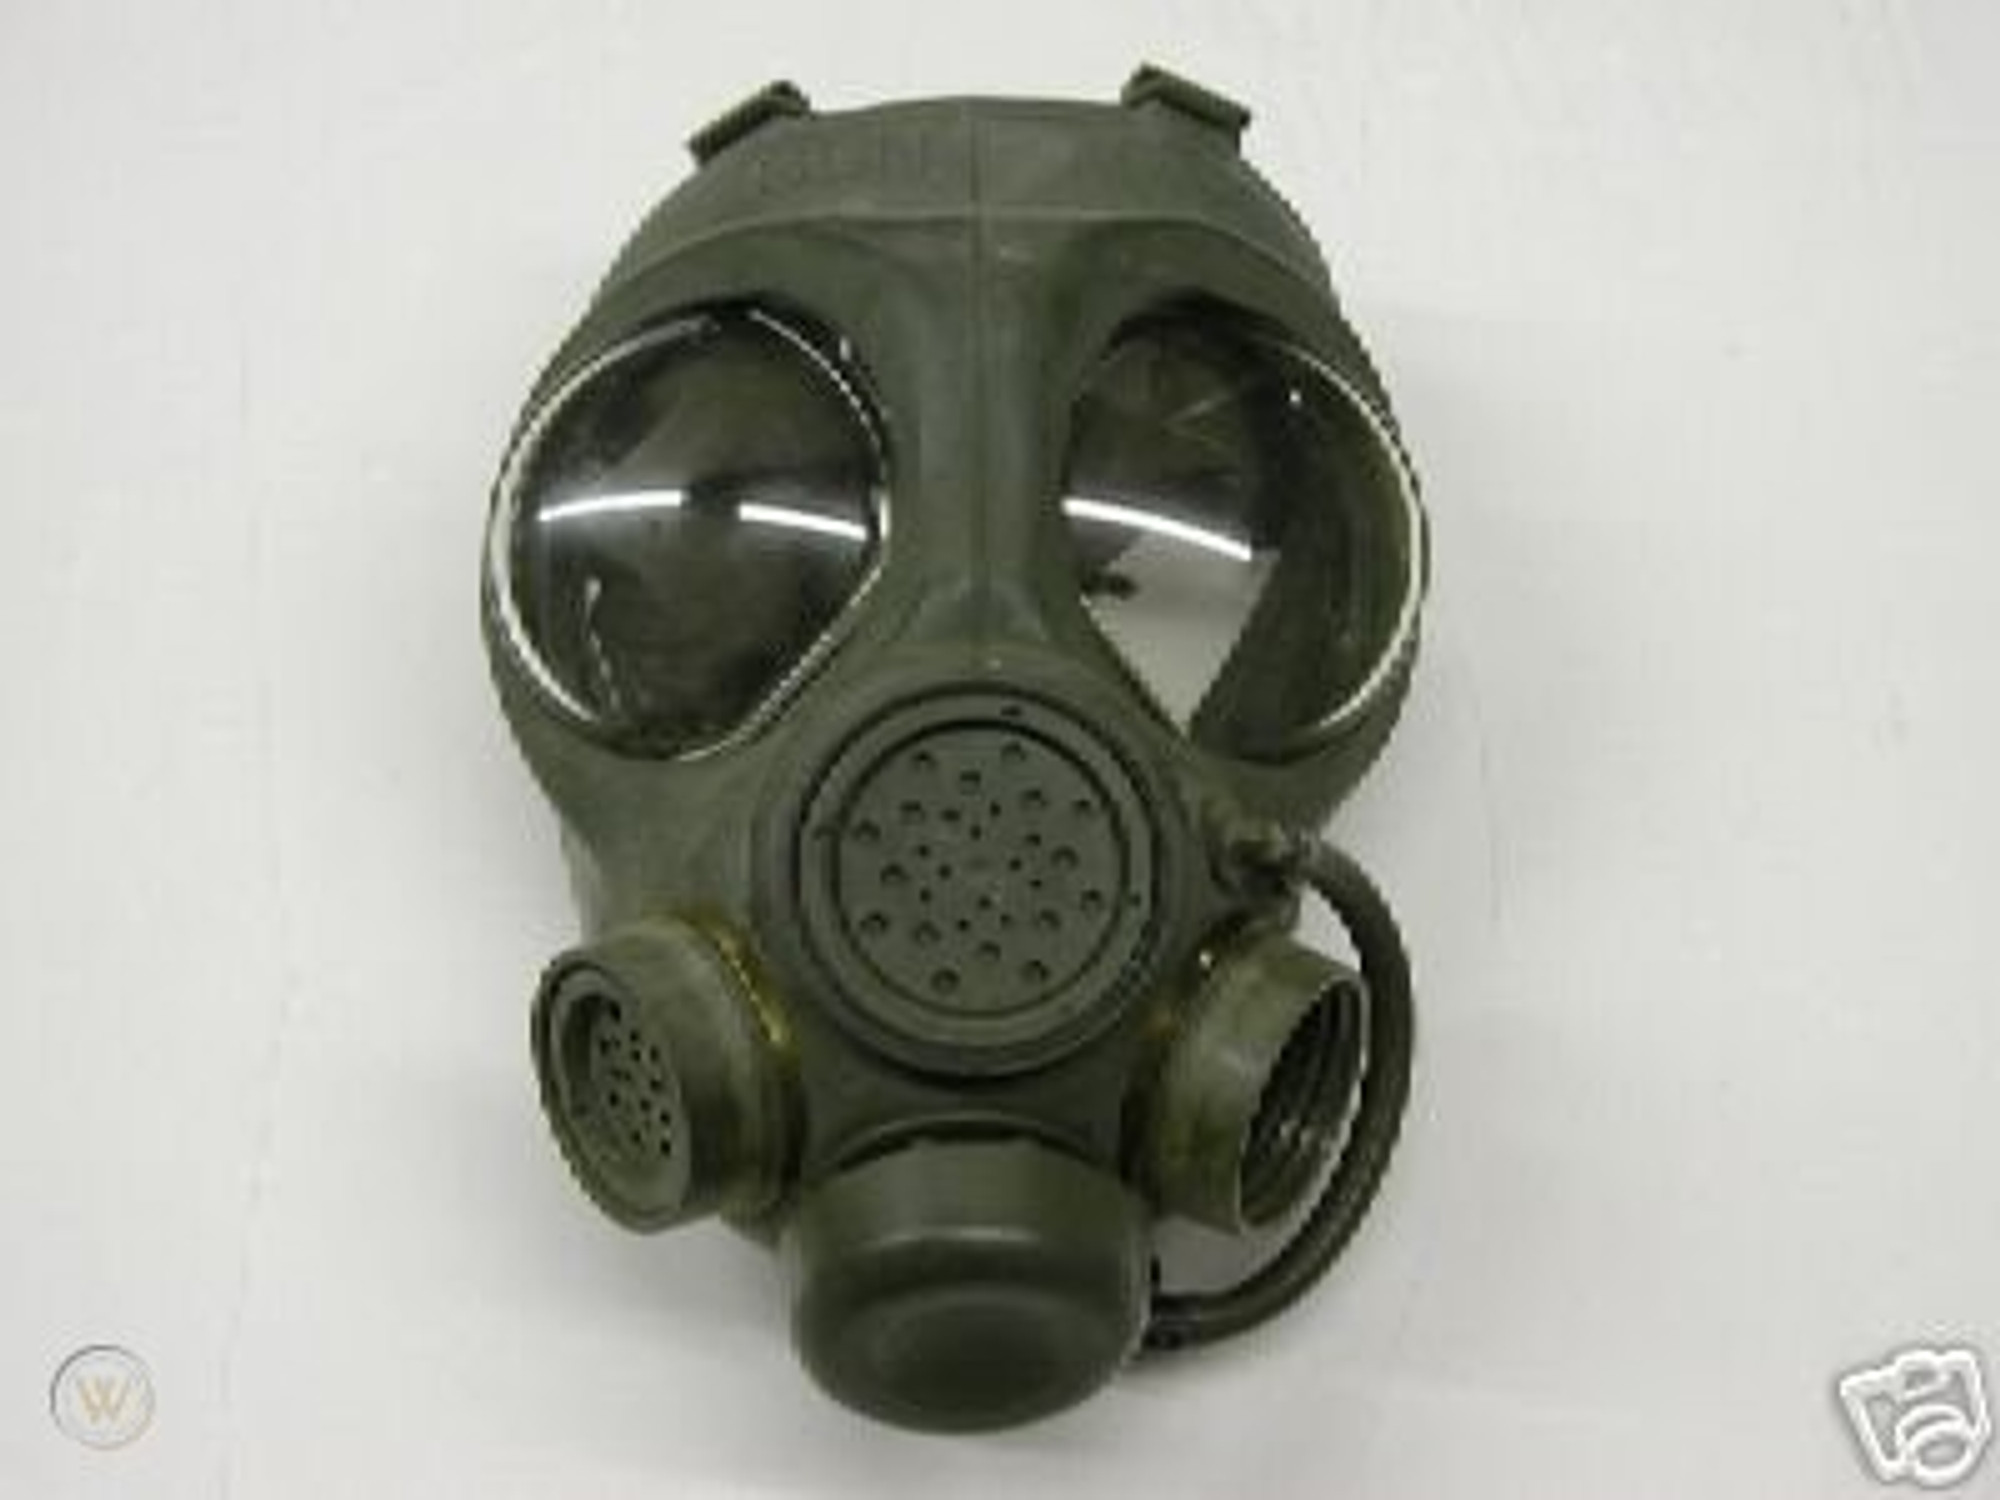 Canadian Armed Forces Issue C4 Gas Mask w/ Carrier -Demilled